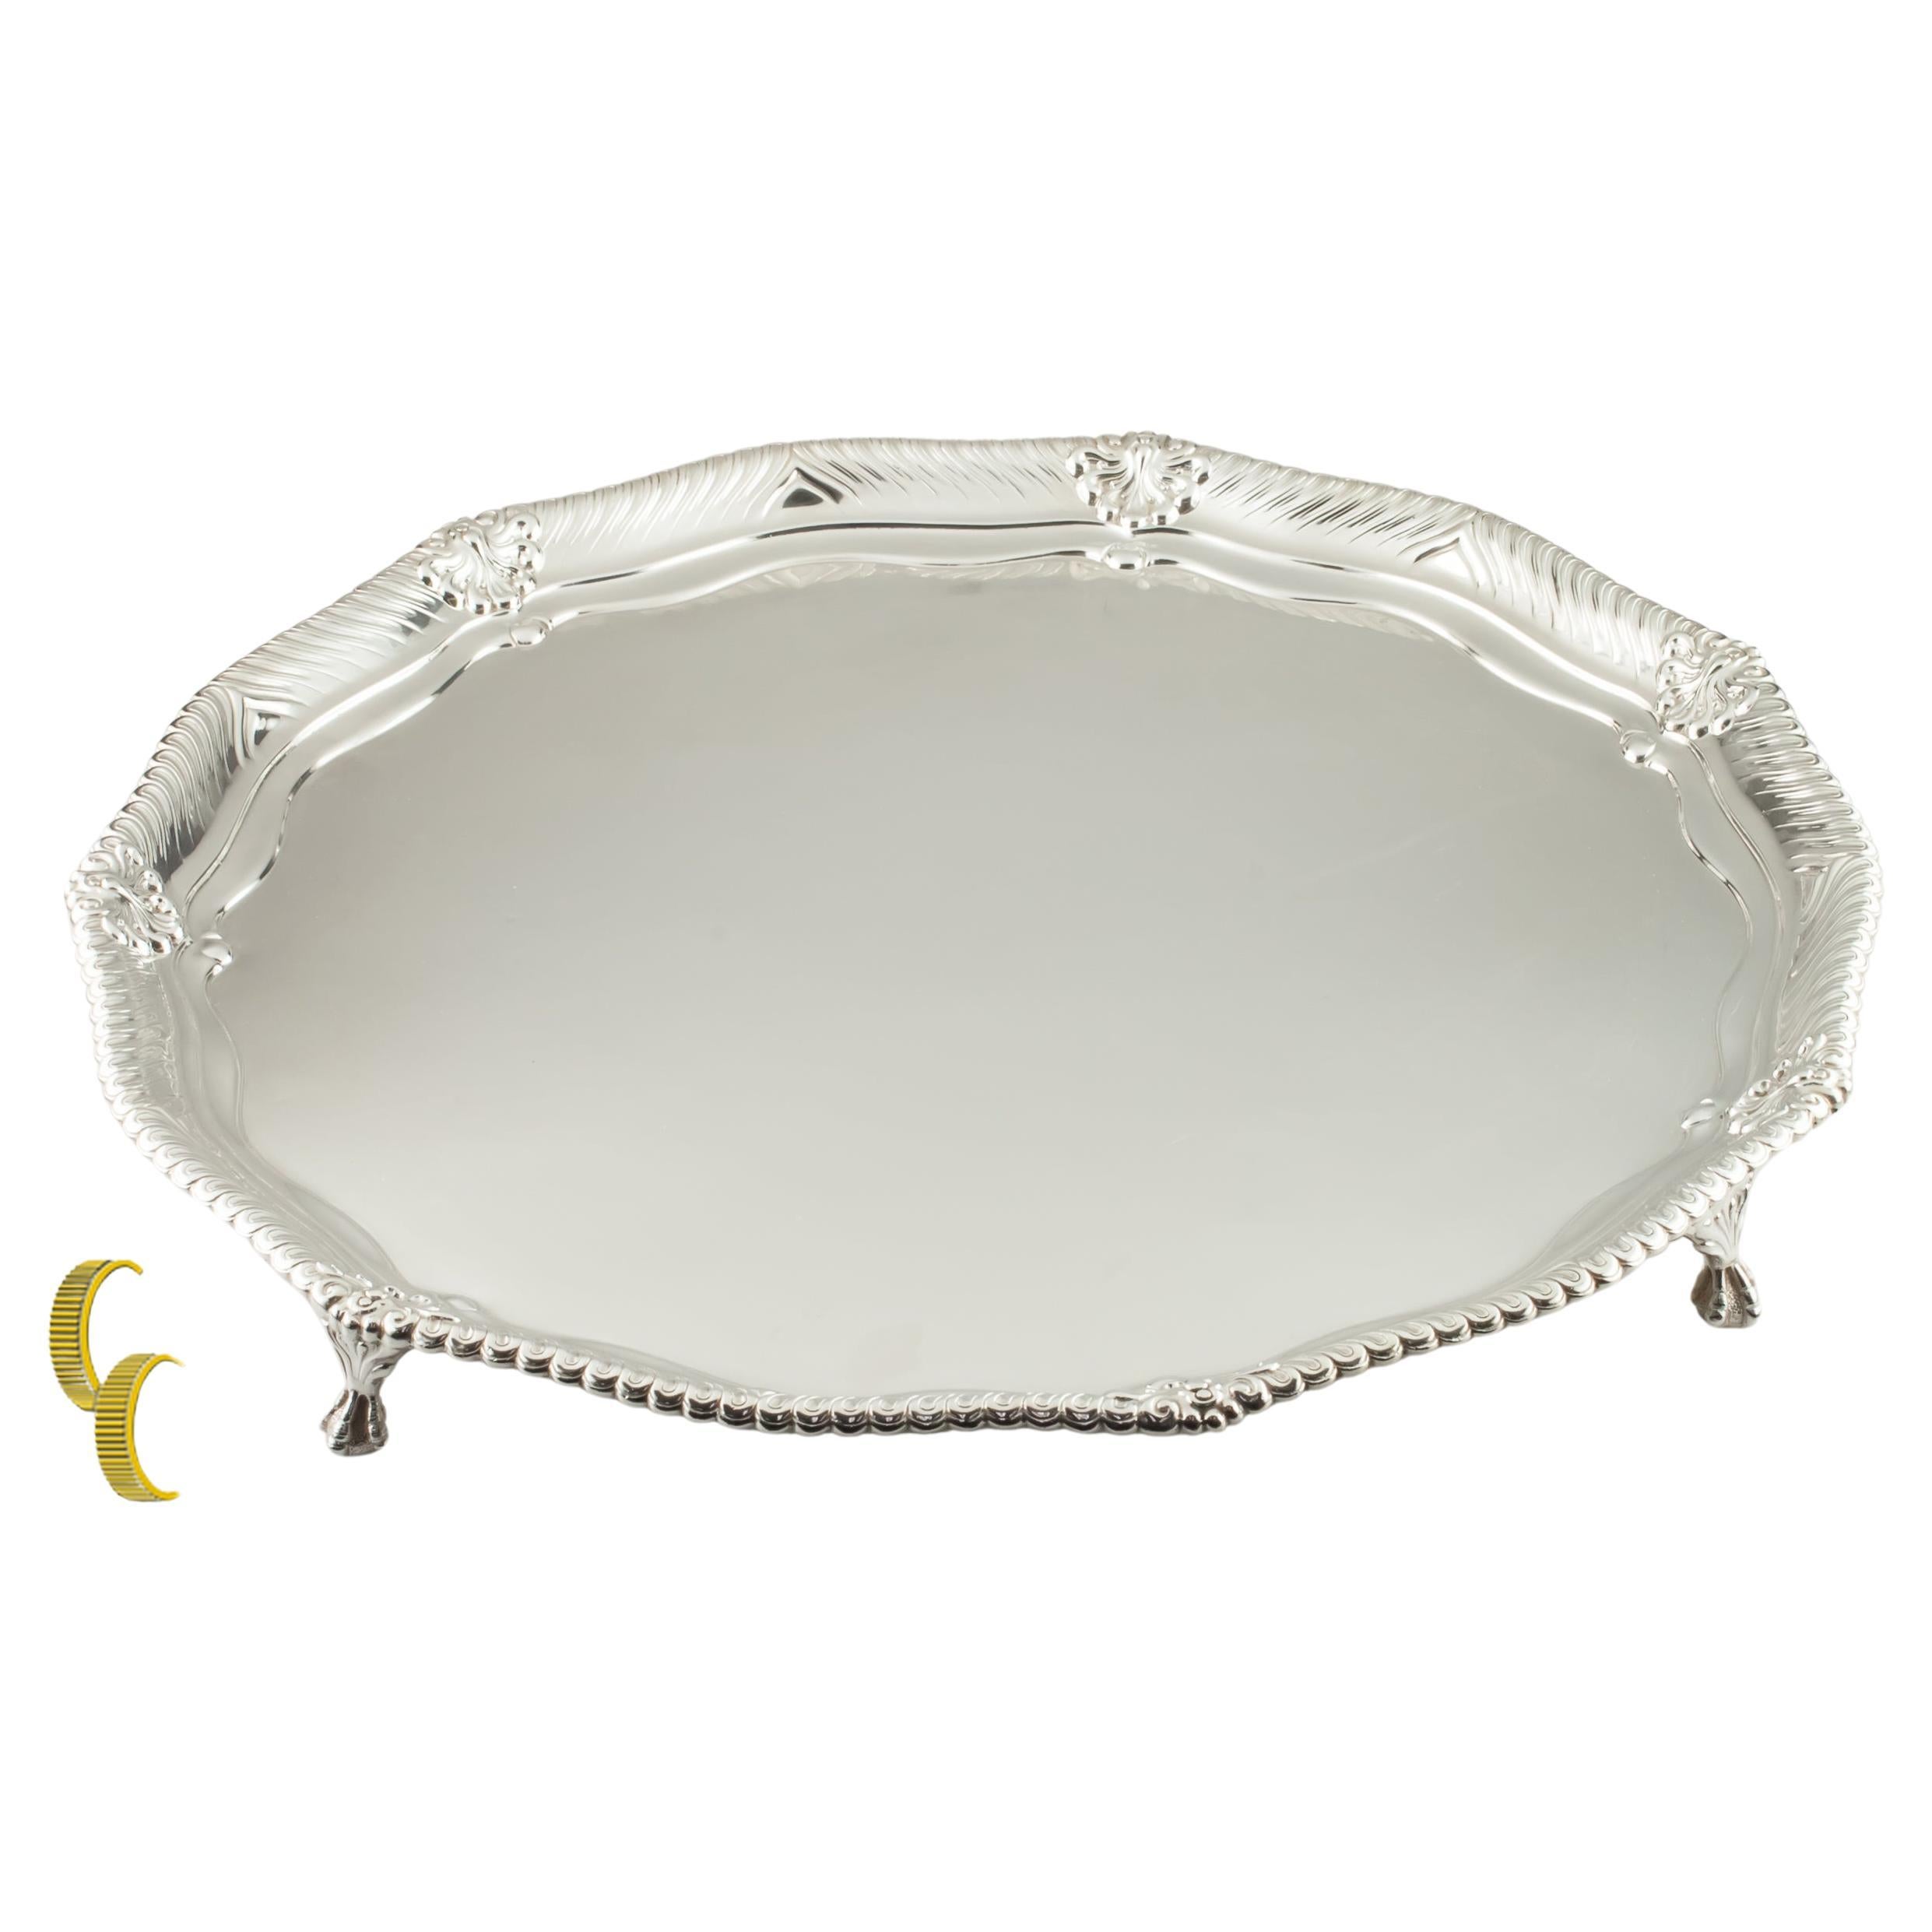  Tiffany Makers Sterling Silver Large Footed Tray 1888 86.5 ounces Great Antique For Sale